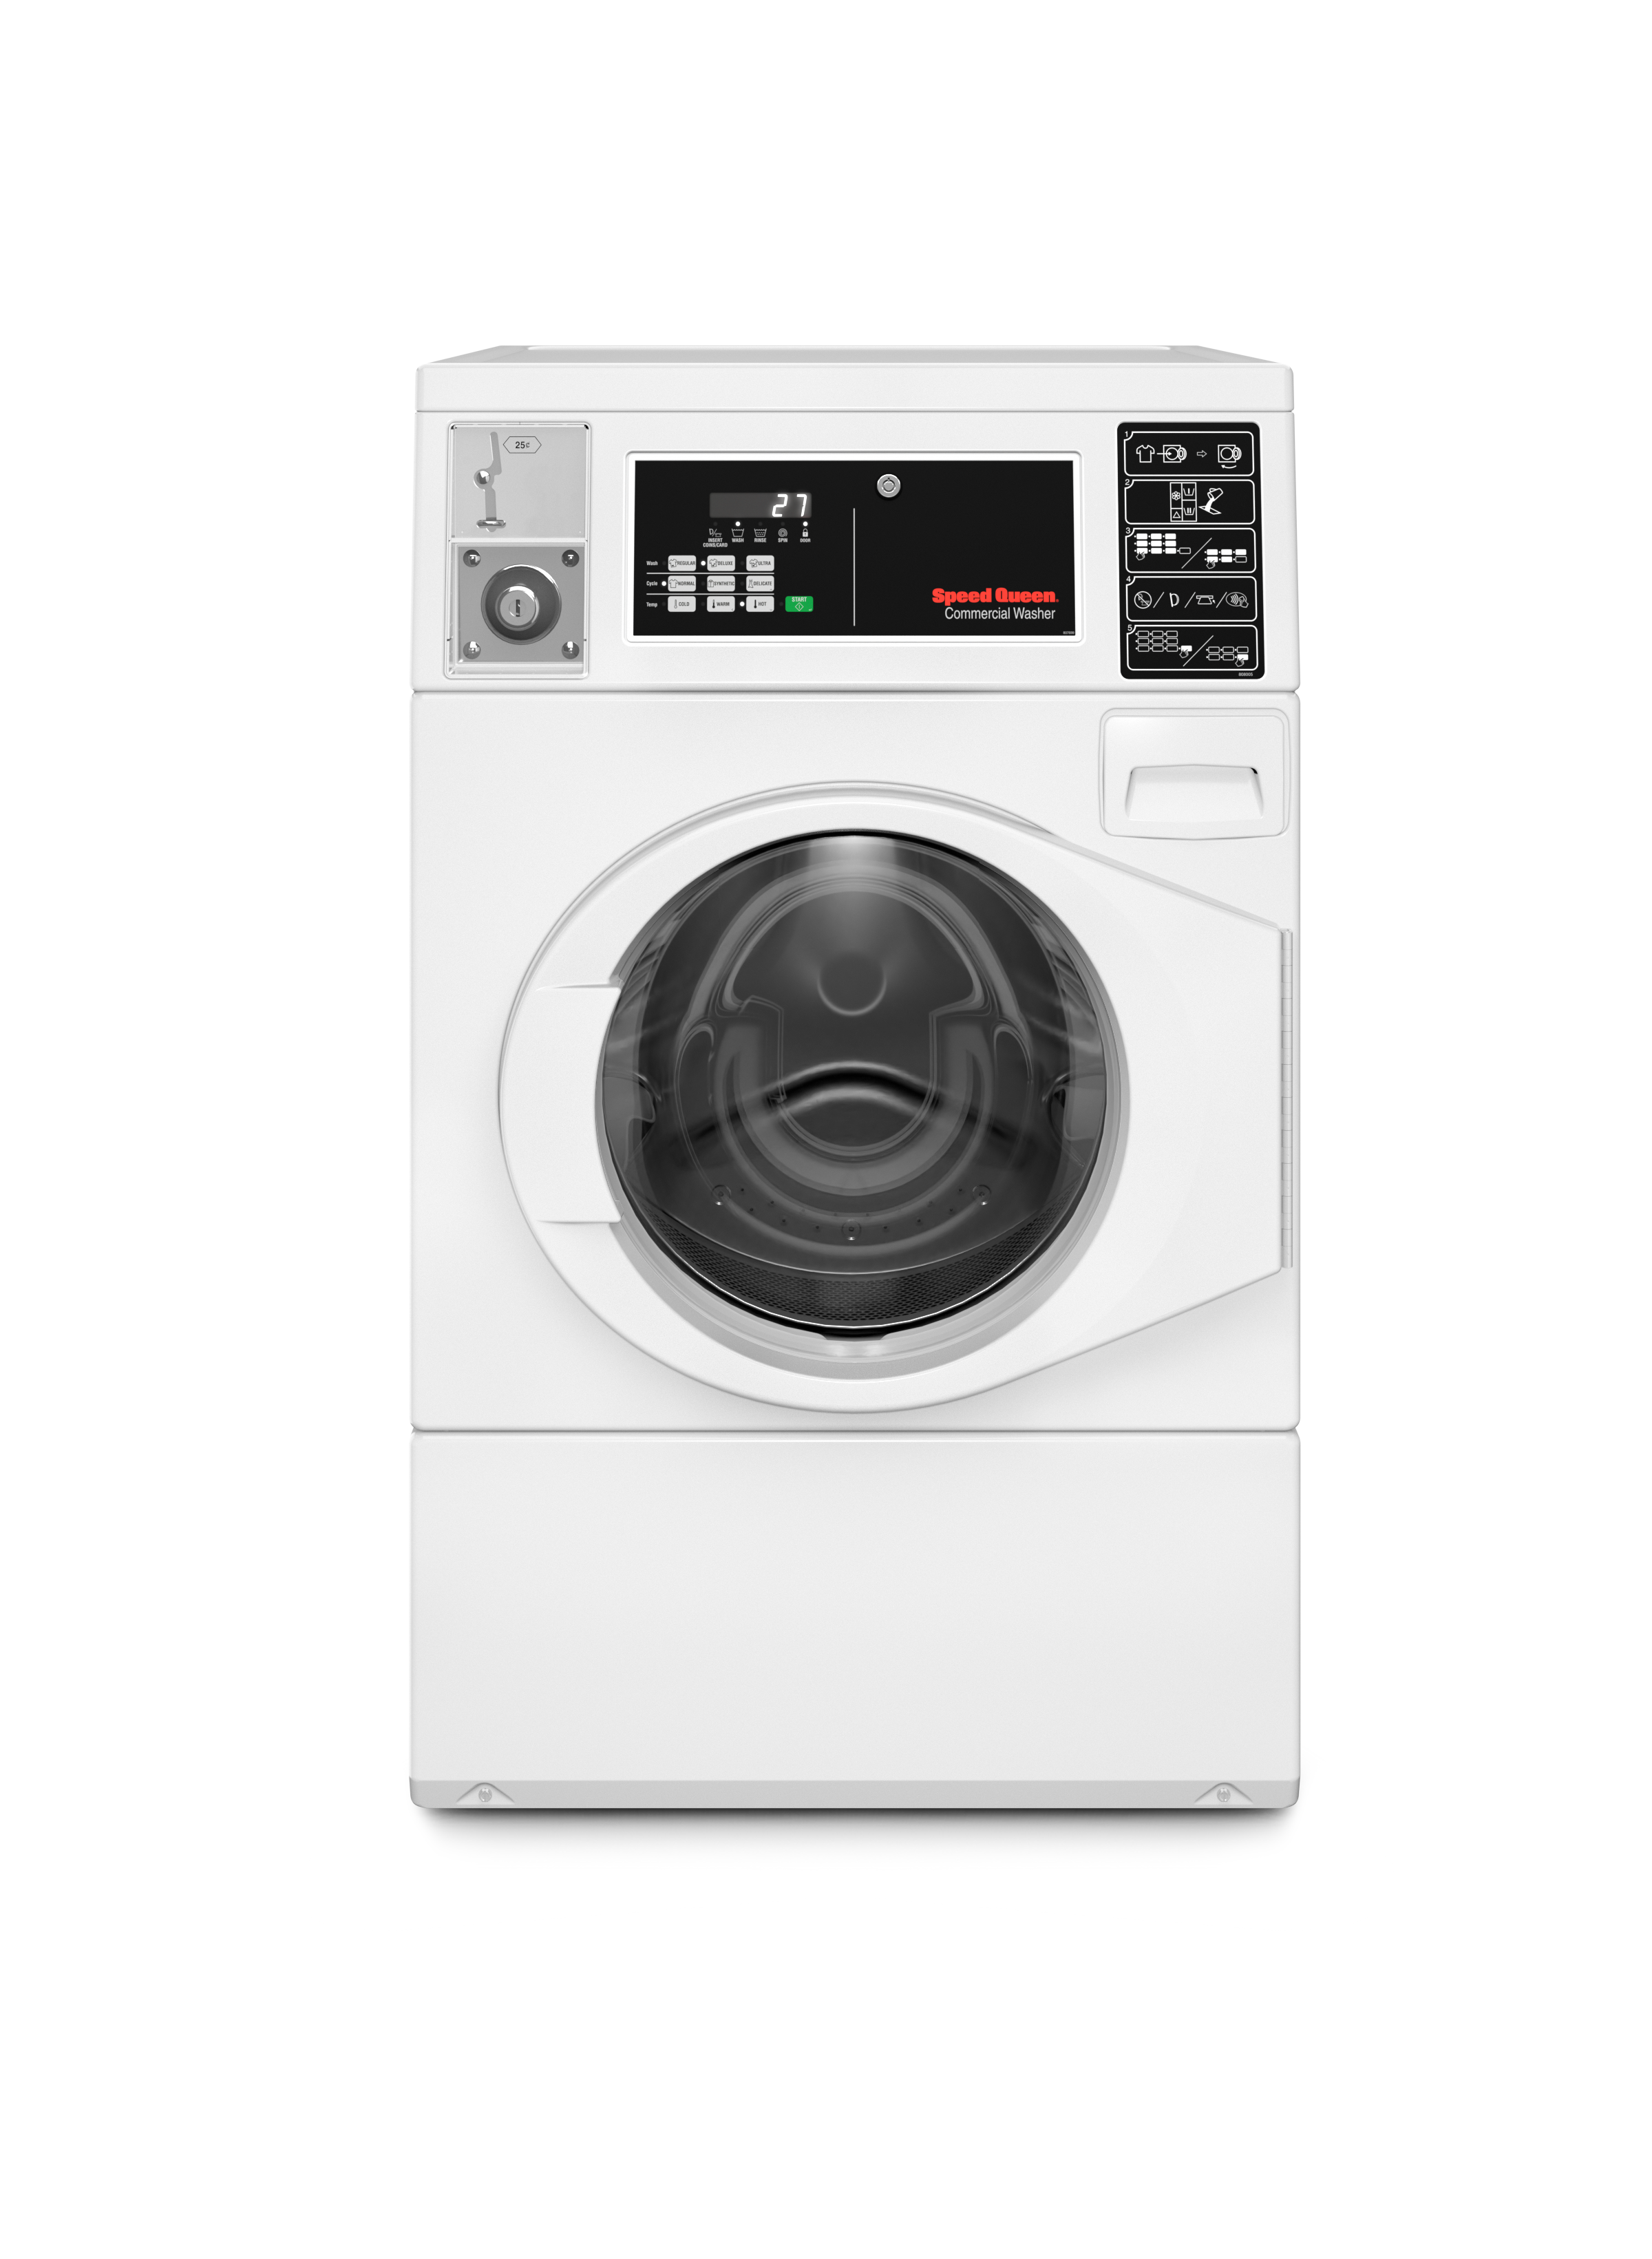 front view of washer with Quantum Gold control